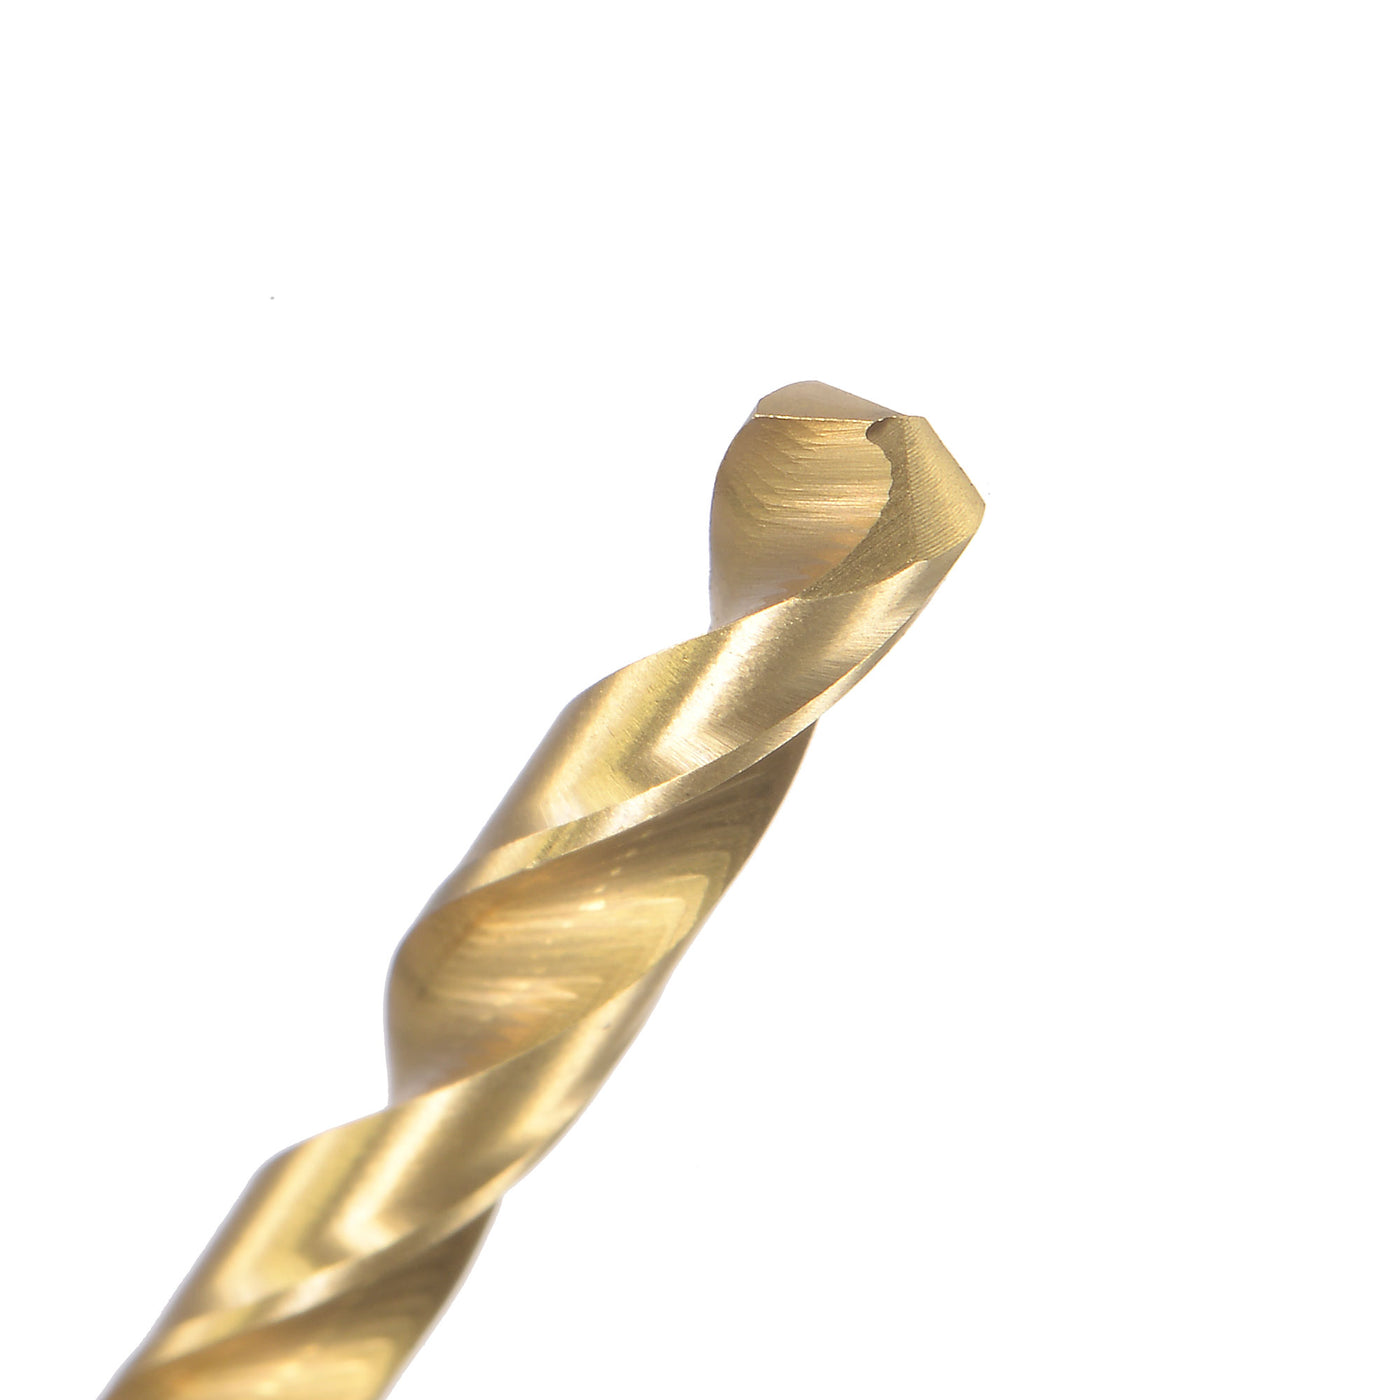 uxcell Uxcell High Speed Steel Twist Drill Bit 3.8mm Fully Ground Titanium Coated 2 Pcs